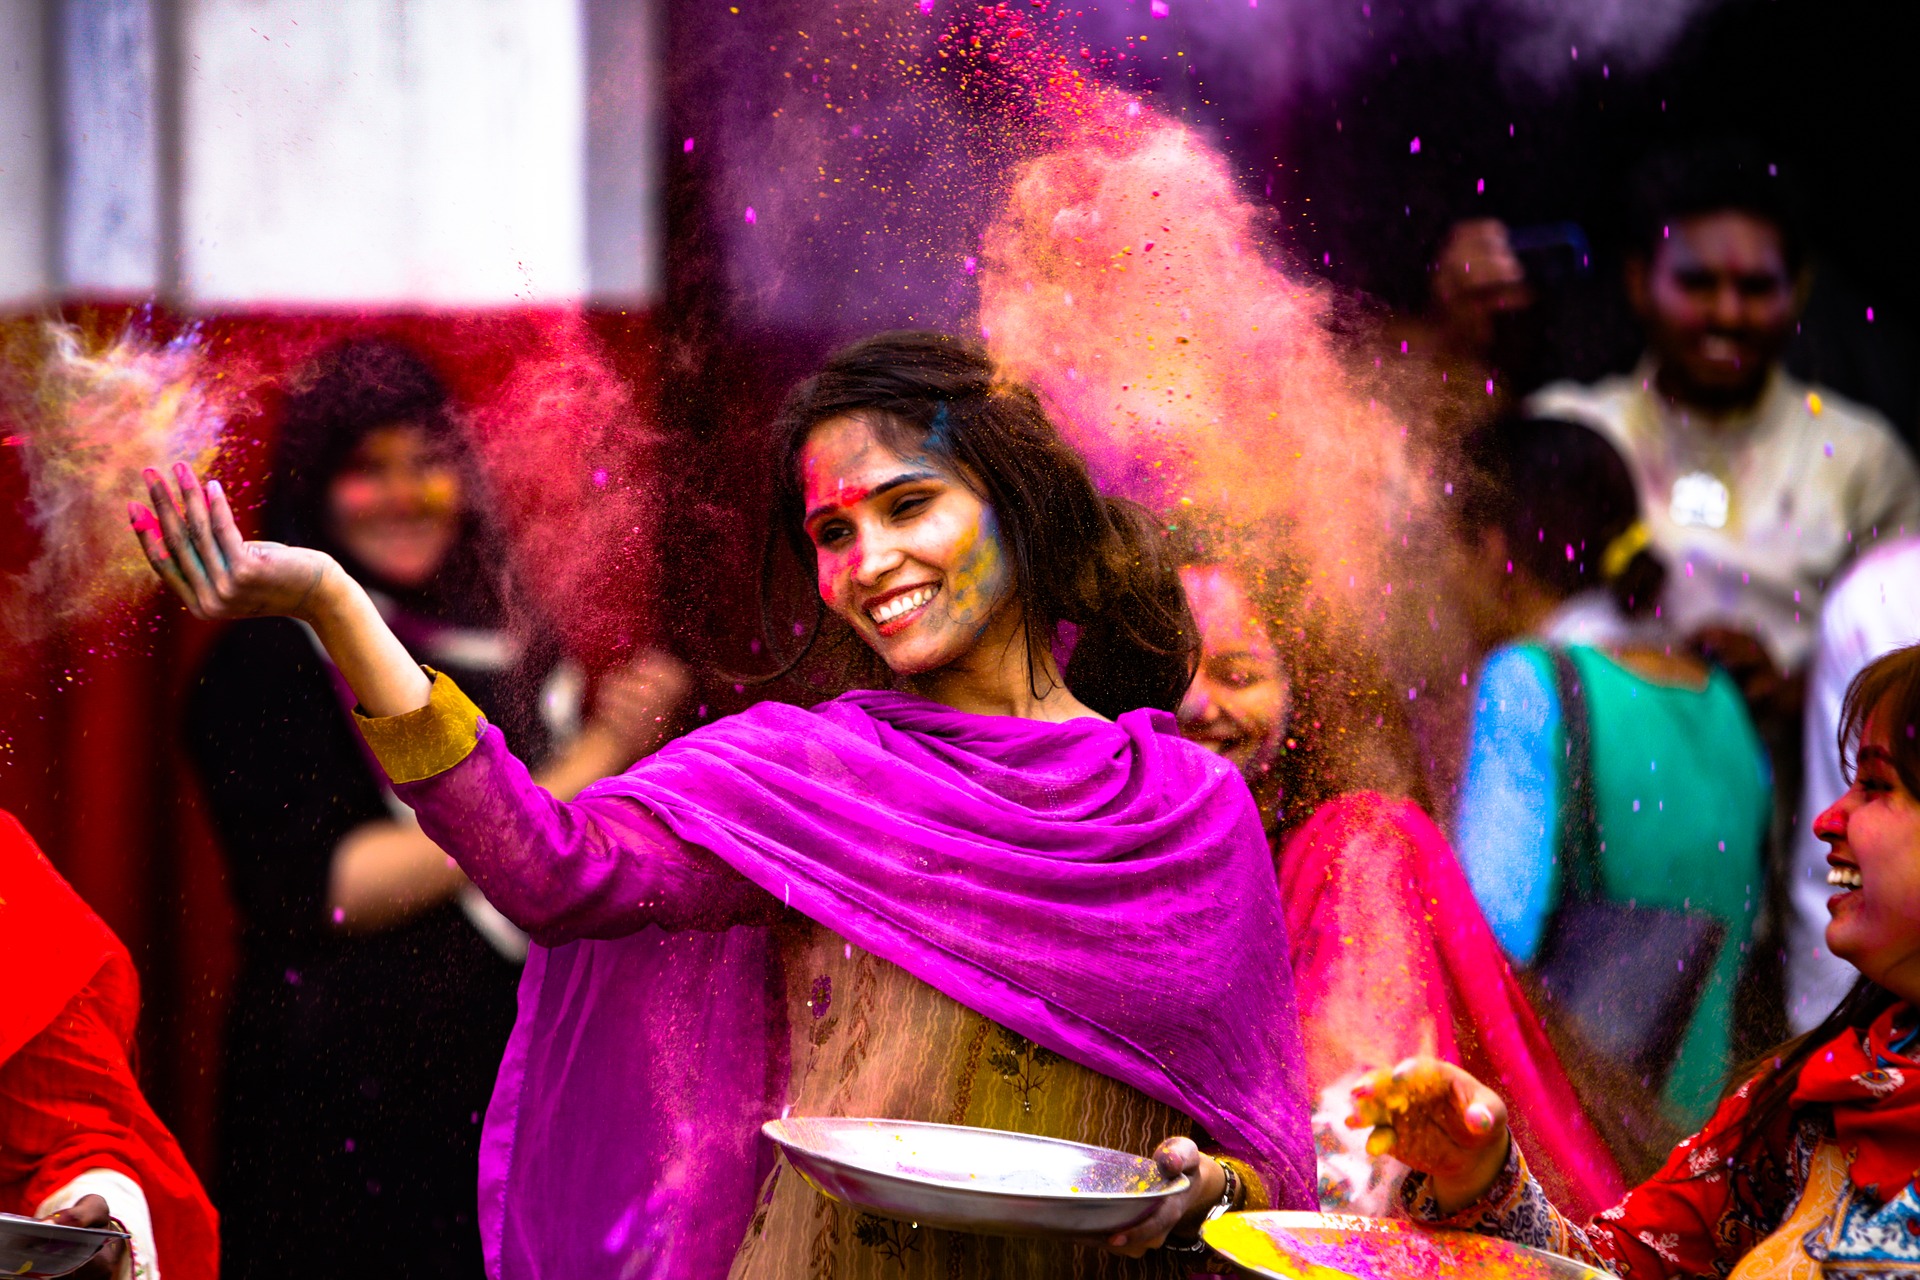 Holi 2018 Why Is it Celebrated, and Other Questions You Might Have_1 holi 2018 Holi 2018: Why Is it Celebrated, and Other Questions You Might Have Holi 2018 Why Is it Celebrated and Other Questions You Might Have 2